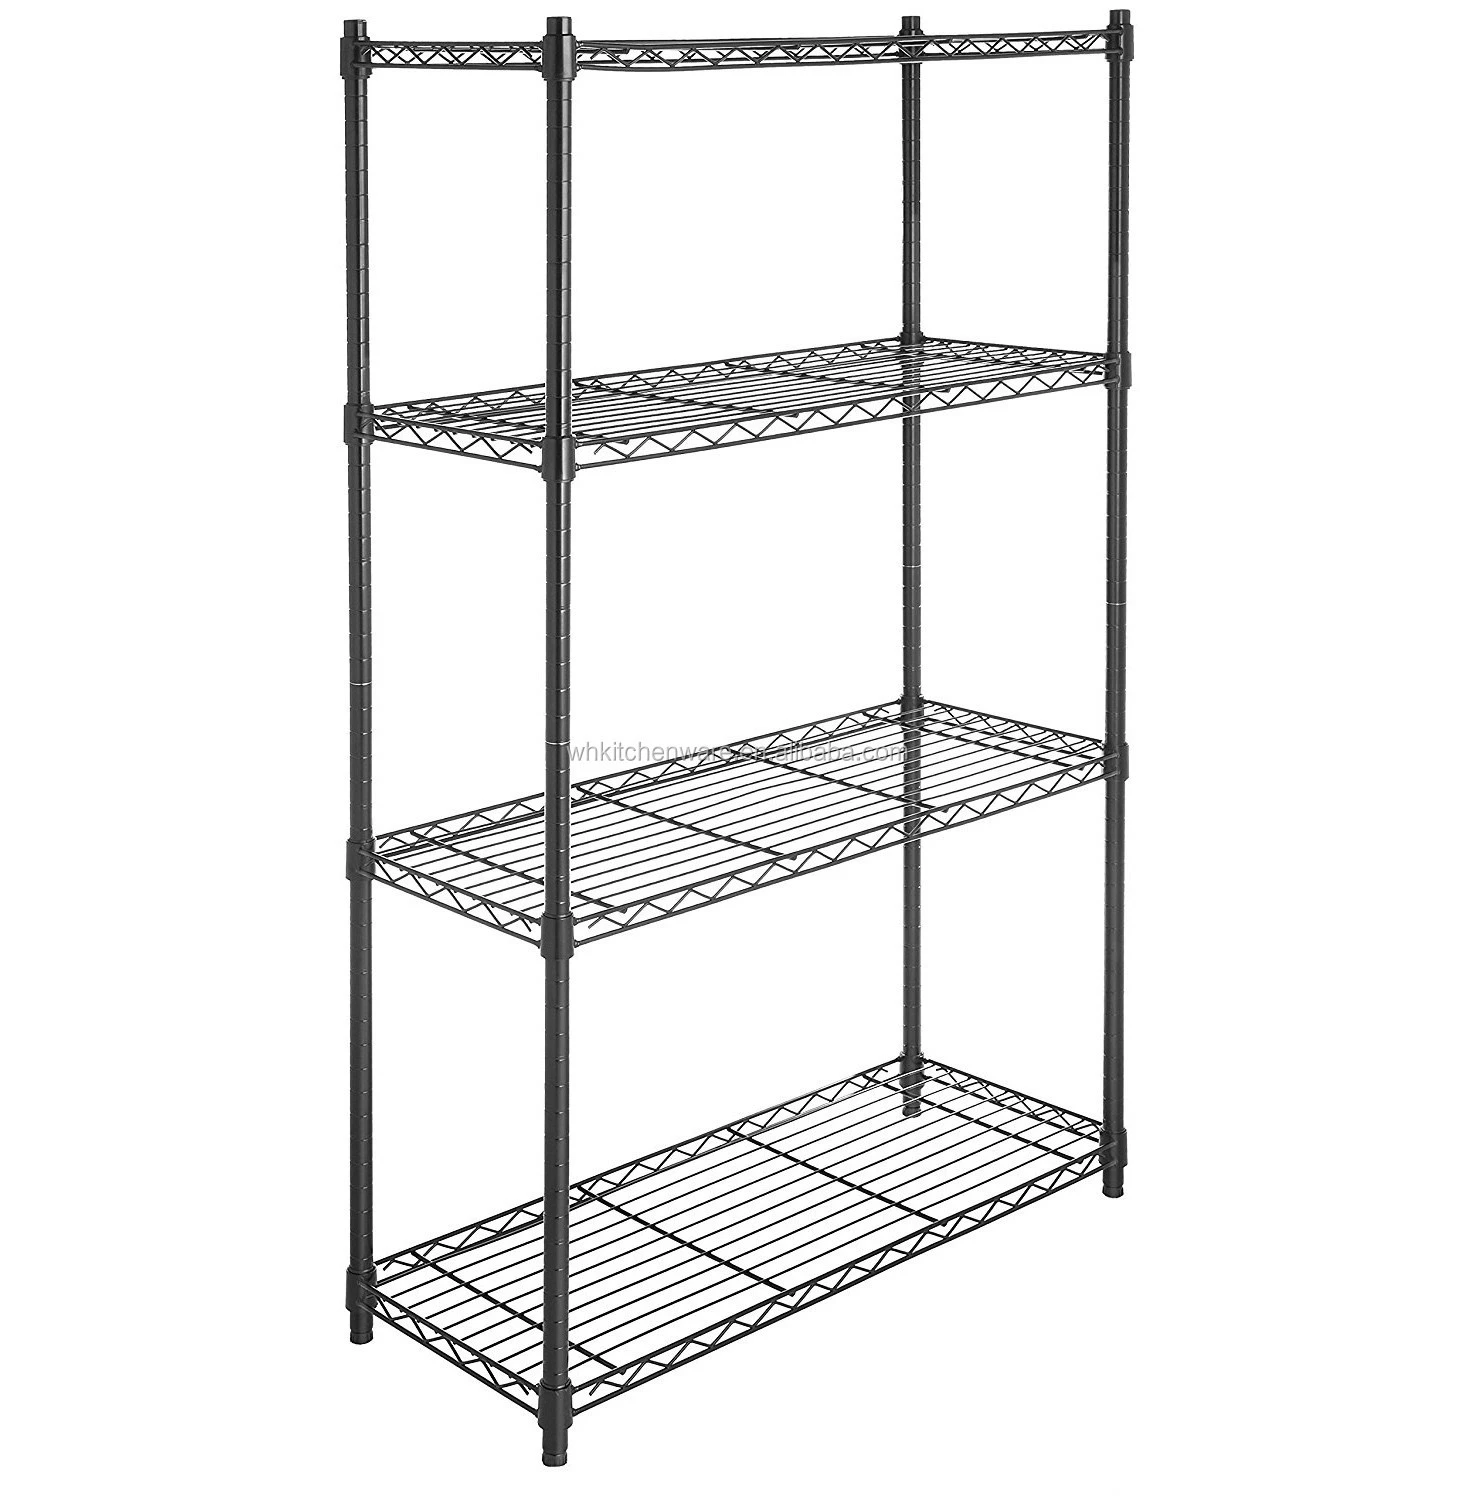 Hot sales Portable stainless steel stacking racks grocery store commodity wire metal shelf rack trolley shelf storage holders